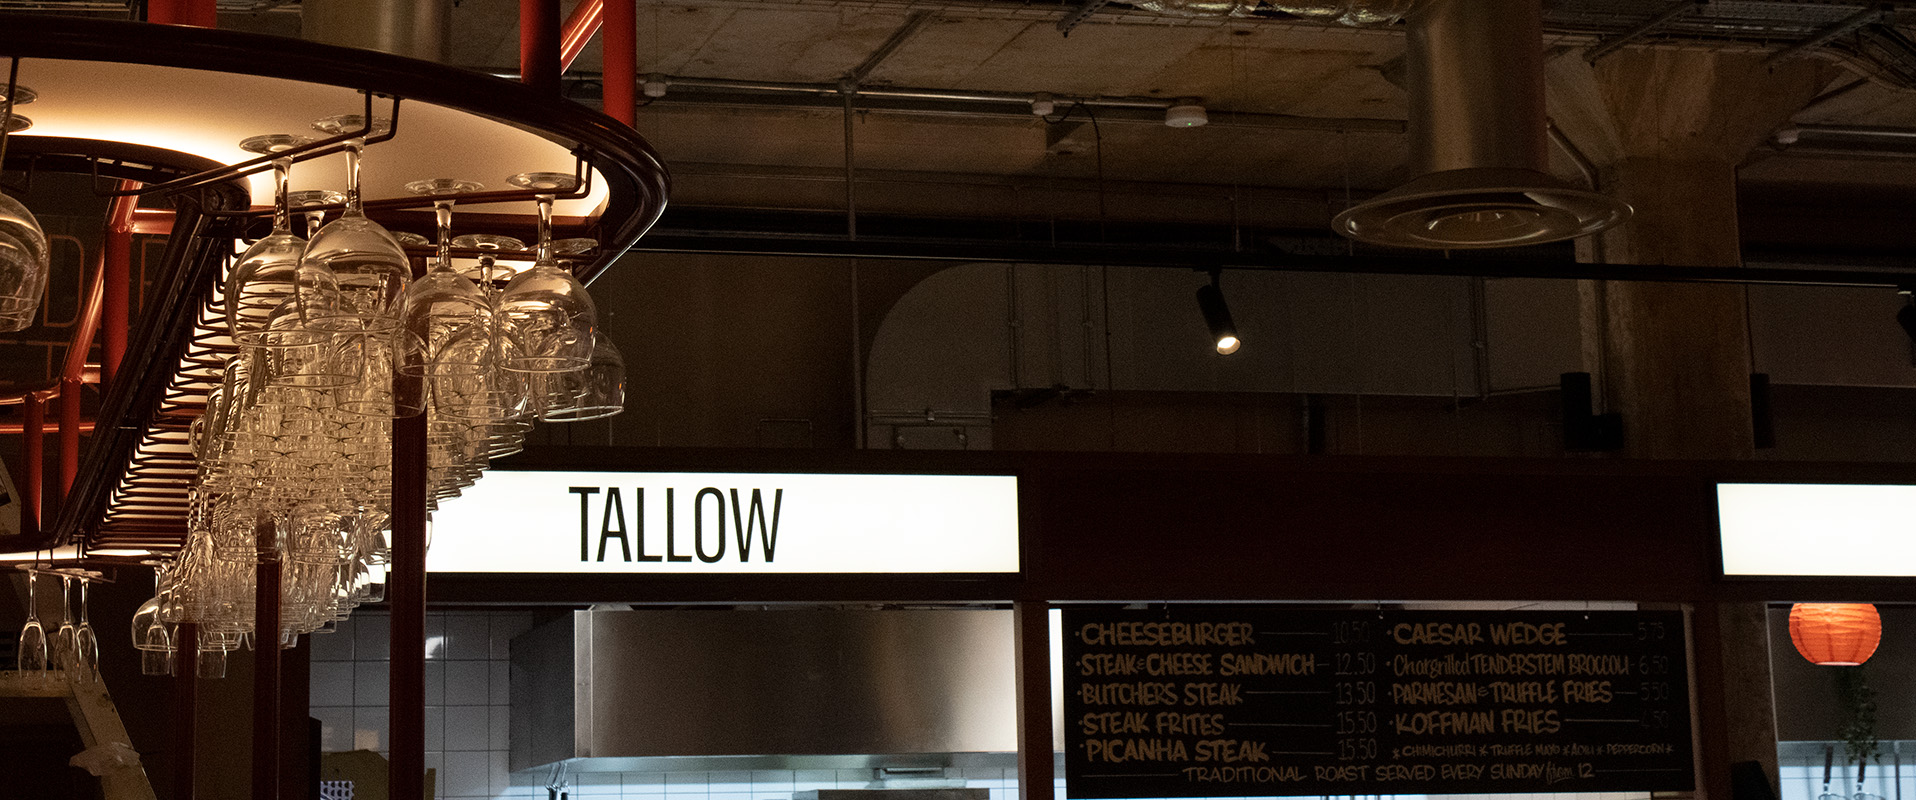 Photo of light box with text "Tallow" situated in the middle of the sign.